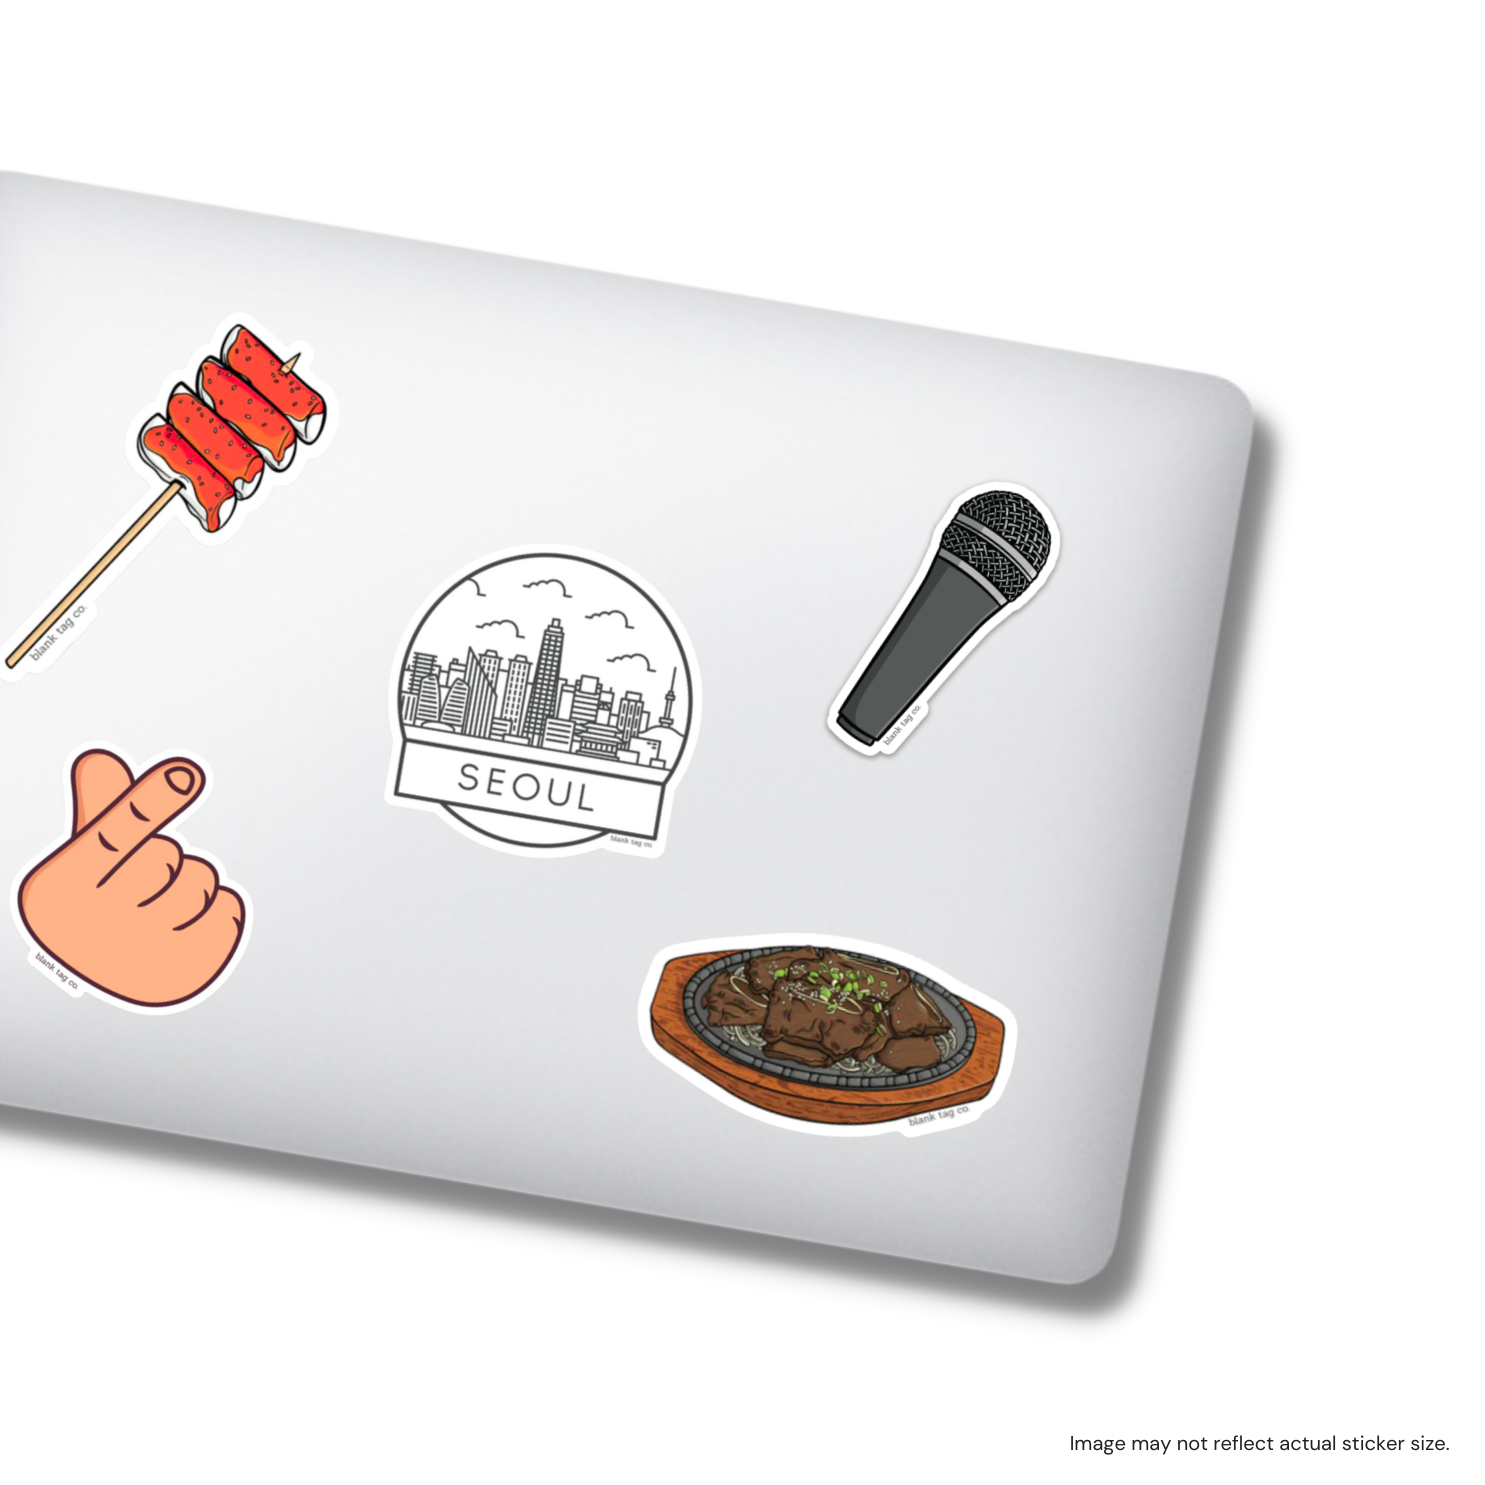 The Microphone Sticker